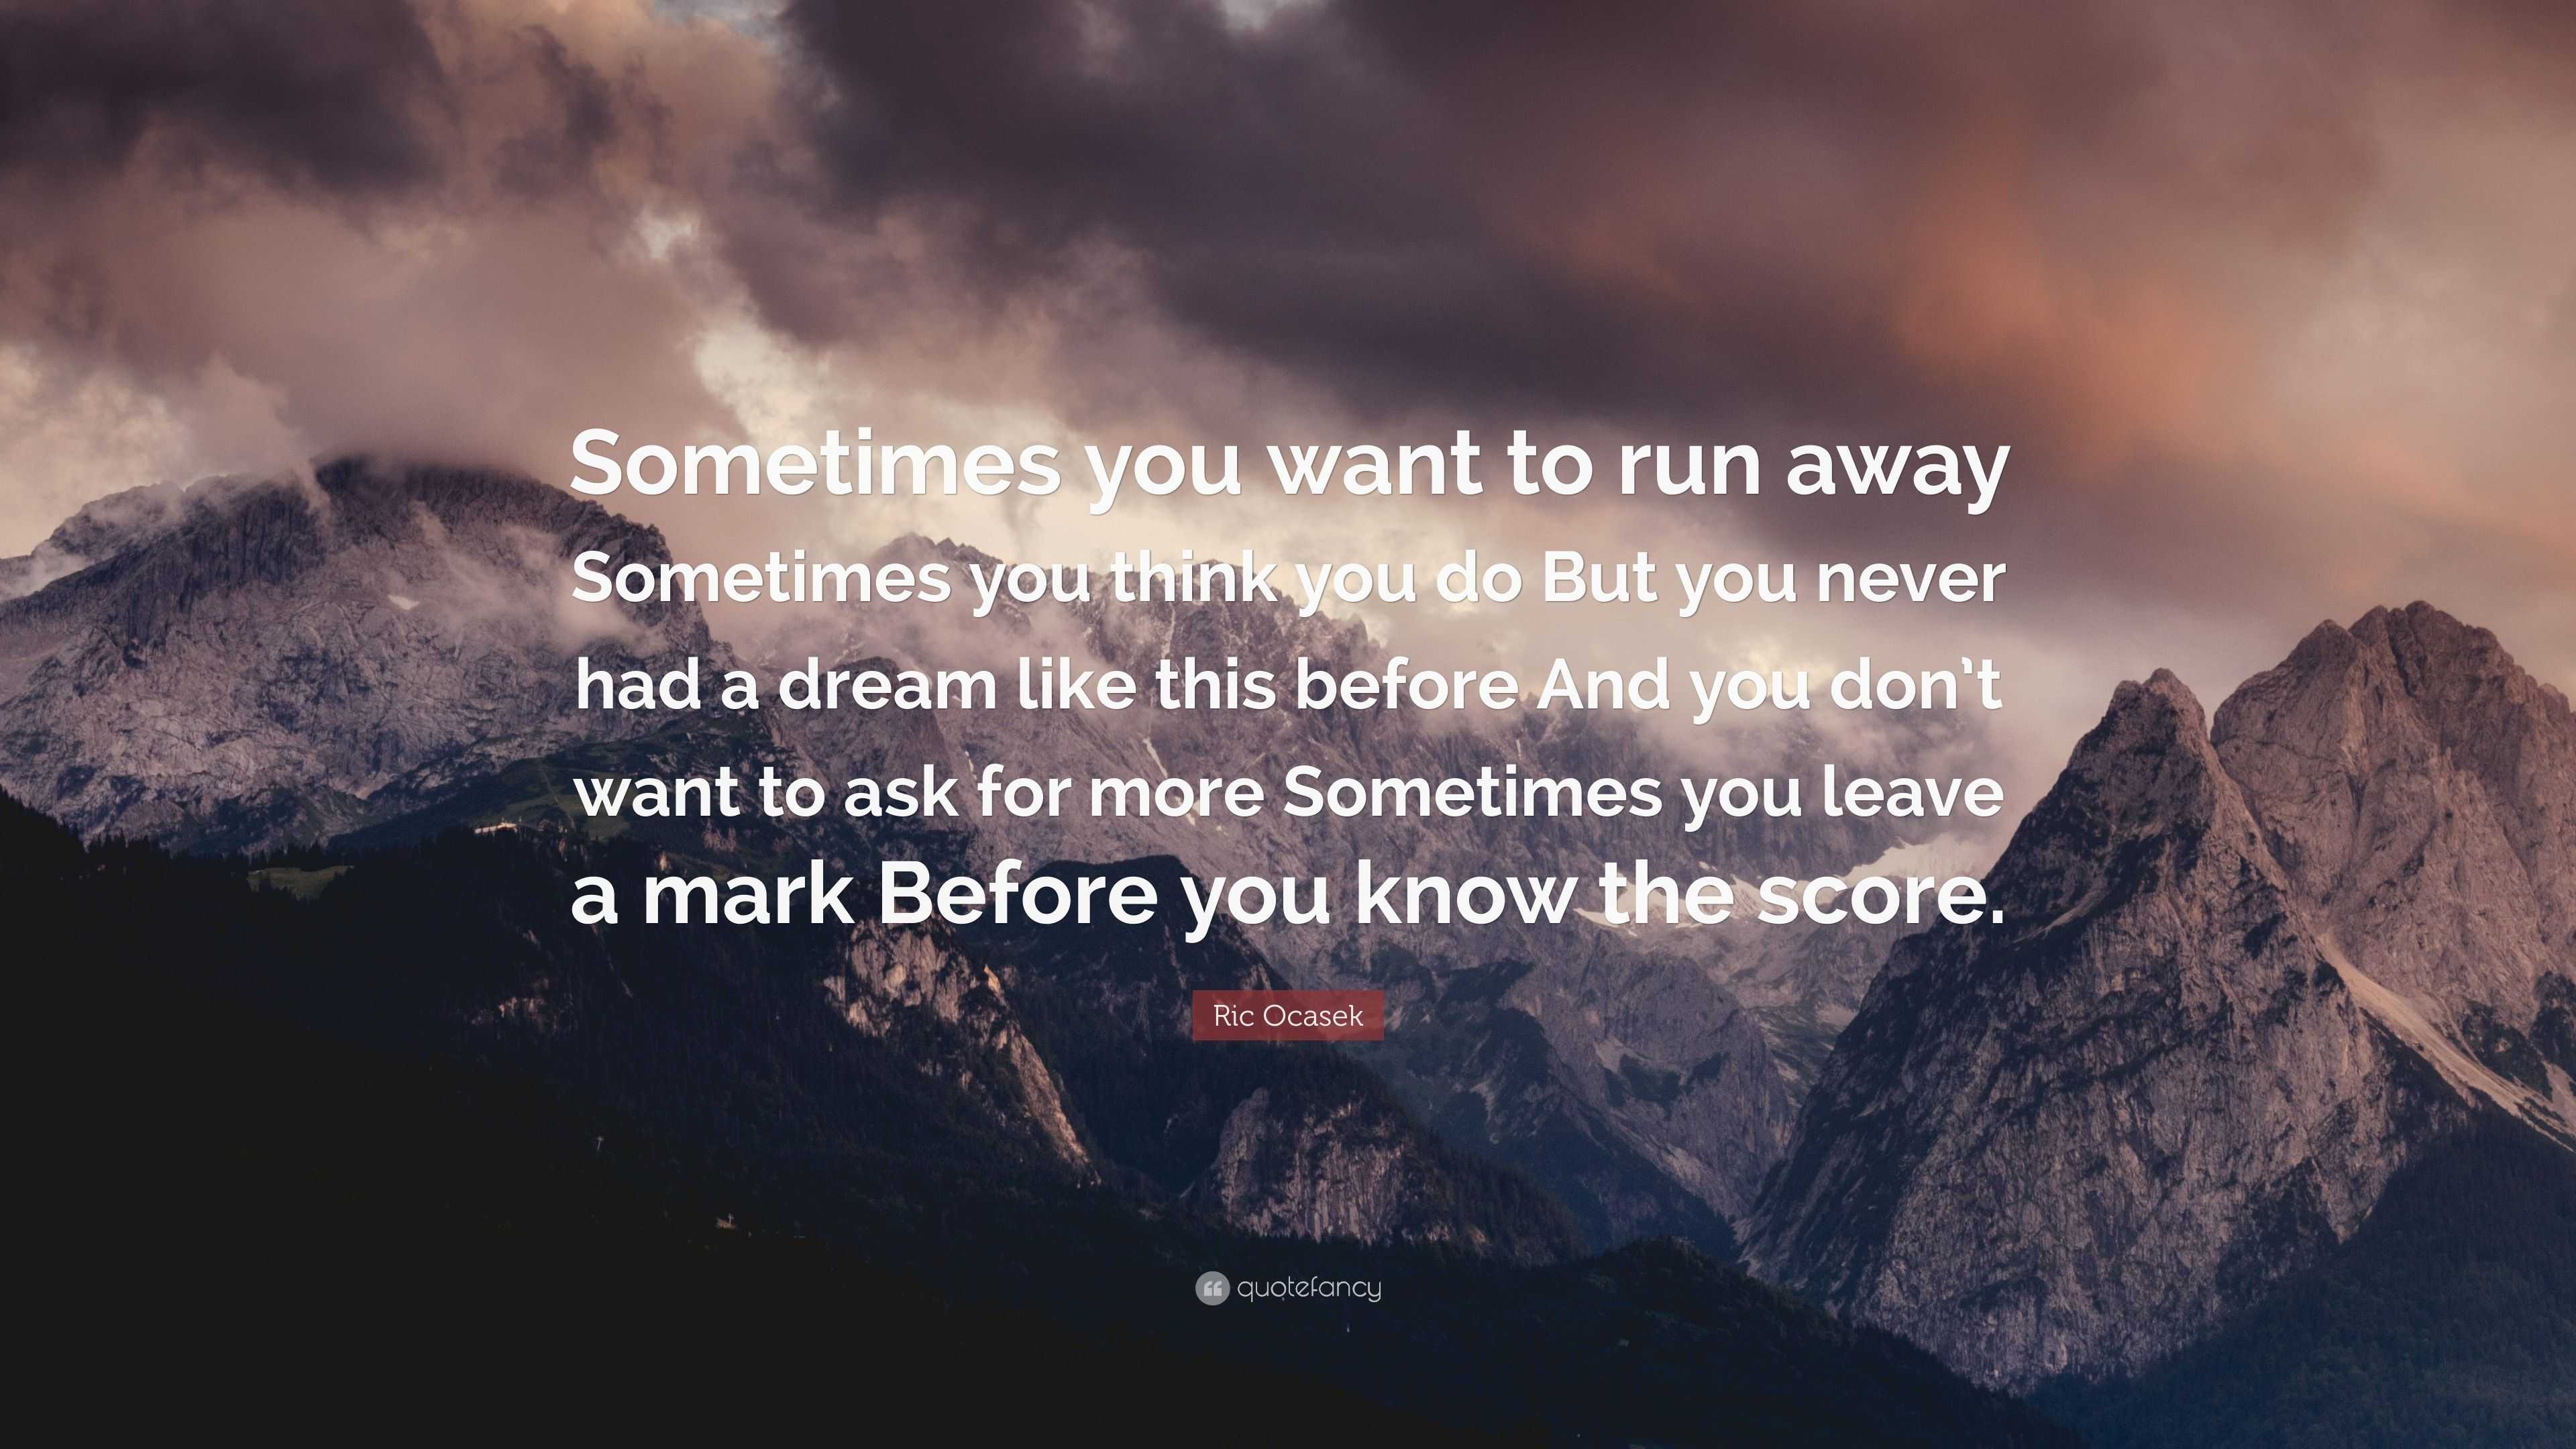 Ric Ocasek Quote: “Sometimes you want to run away Sometimes you think